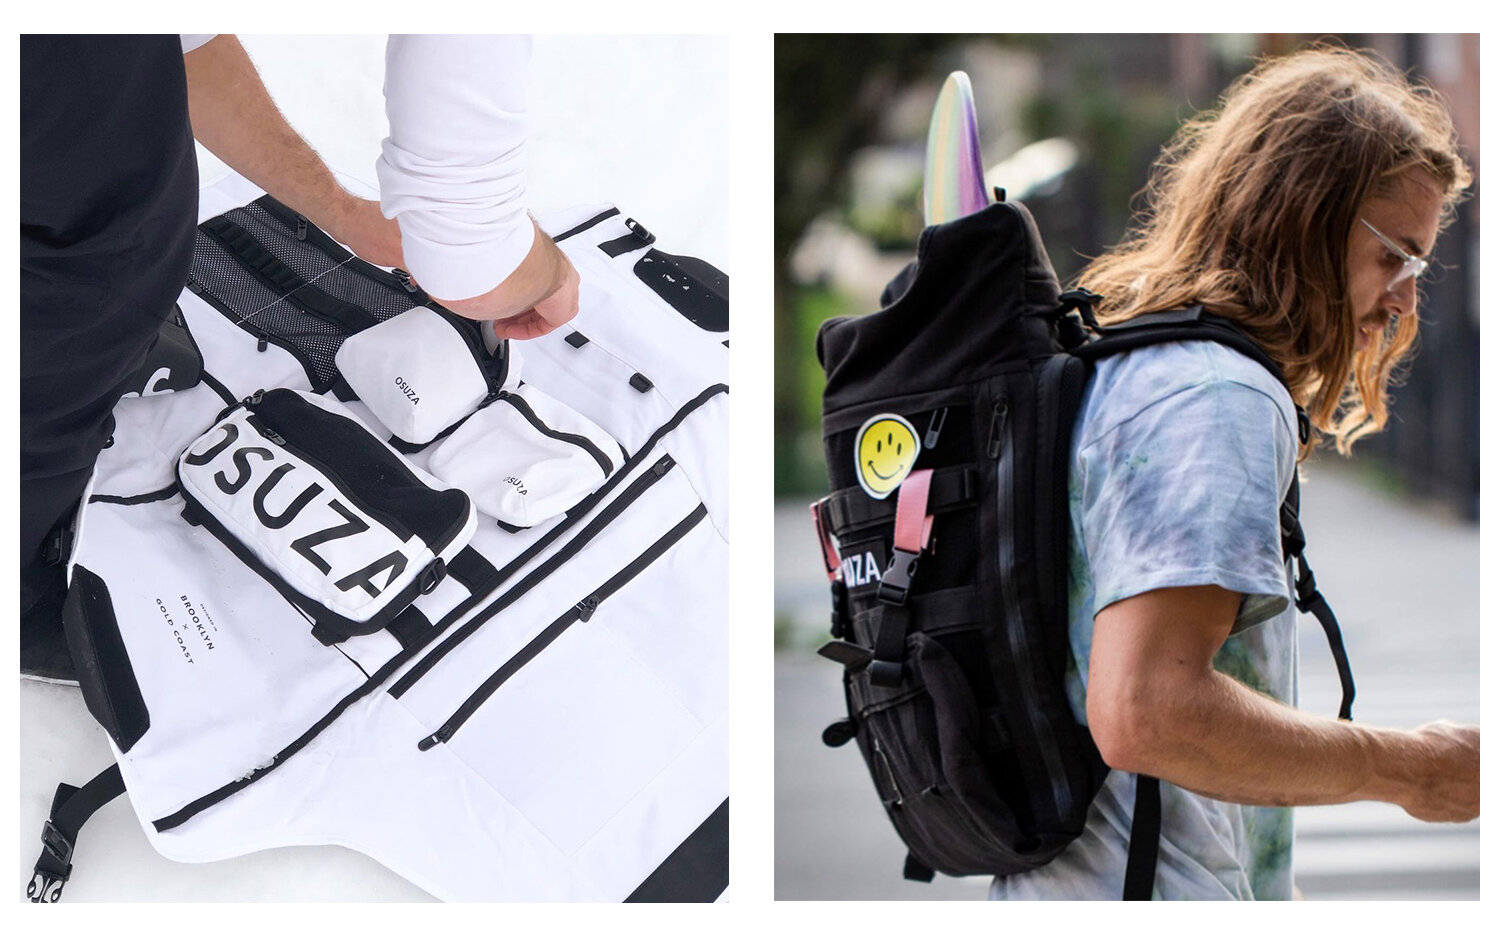 The Osuza Canvas Pack Turns Into a Mobile Artist's Studio